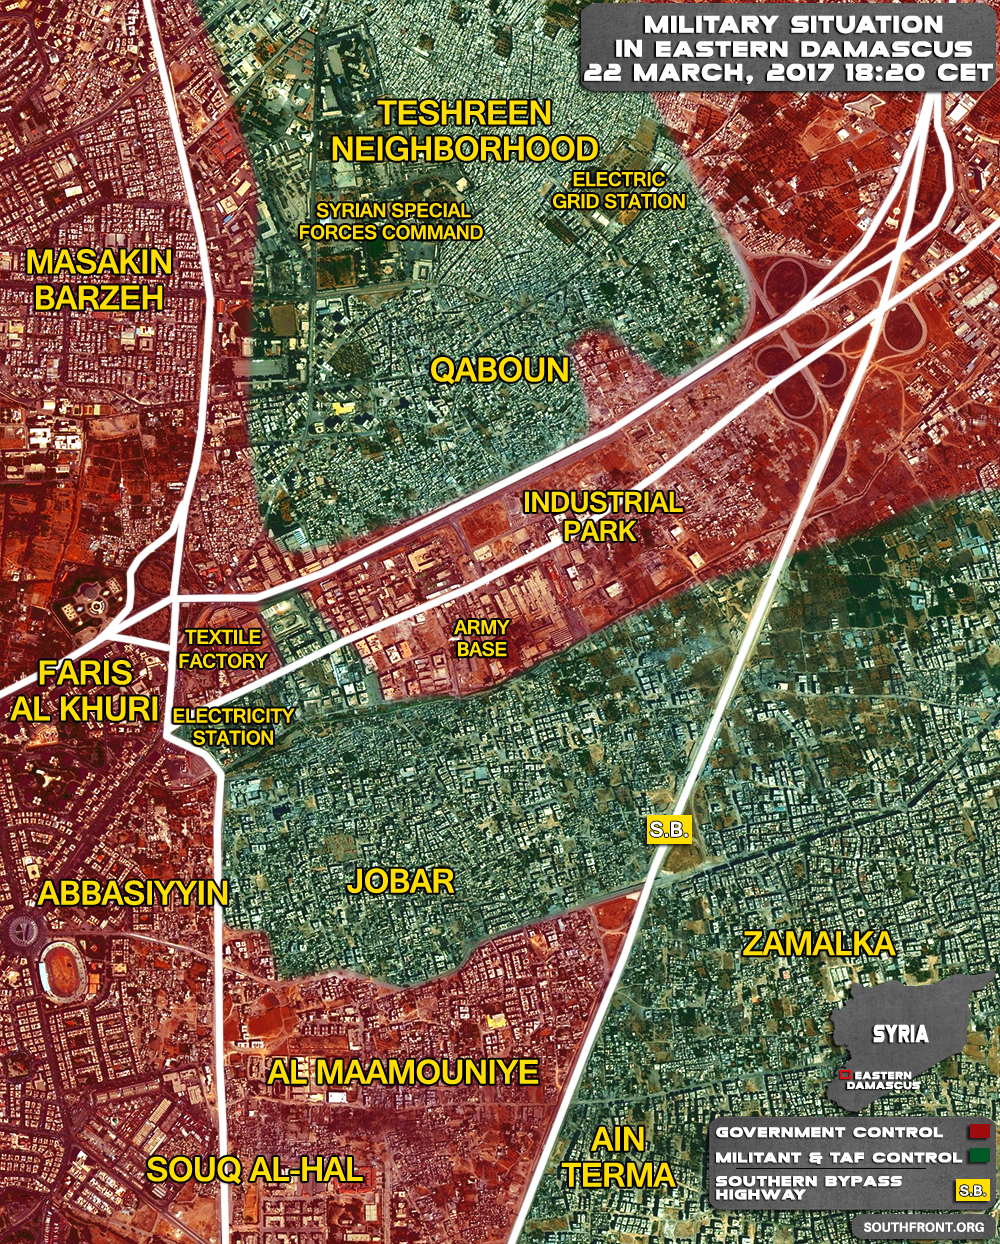 Military Situation In Qabun Industrial Area In Eastern Damascus On March 22, 2017 (Map Update)